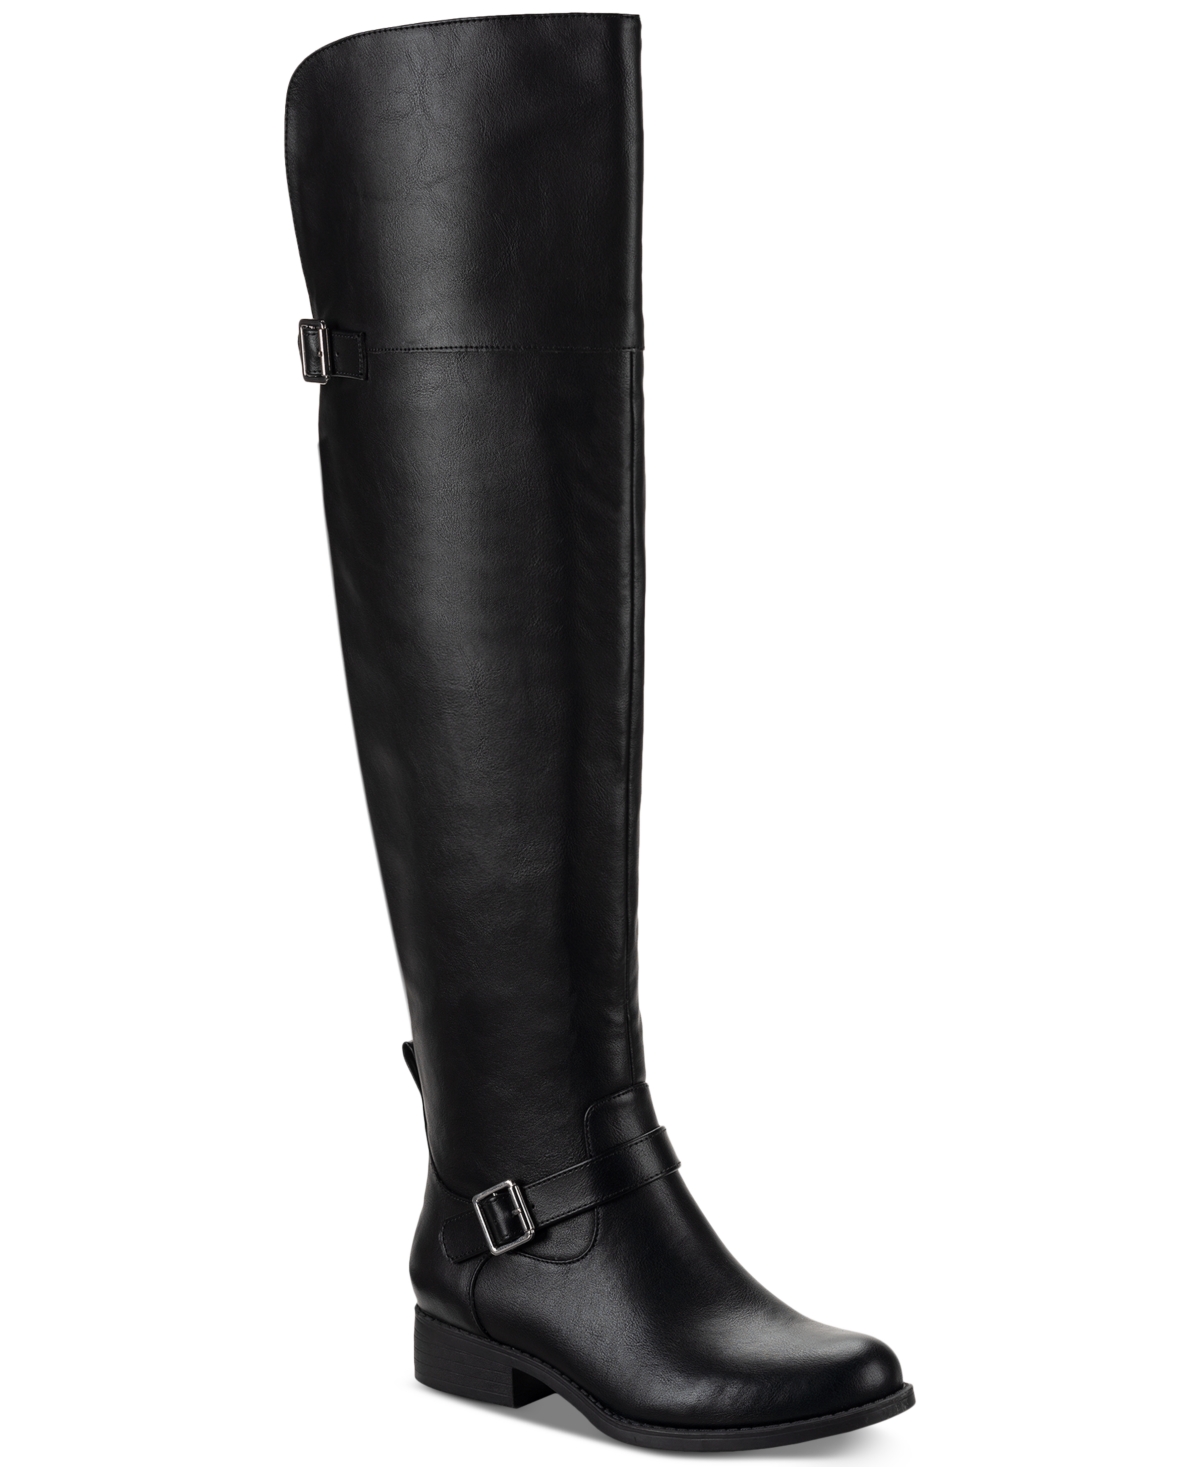 Women's Anyaa Over-The-Knee Boots, Created for Macy's - Black